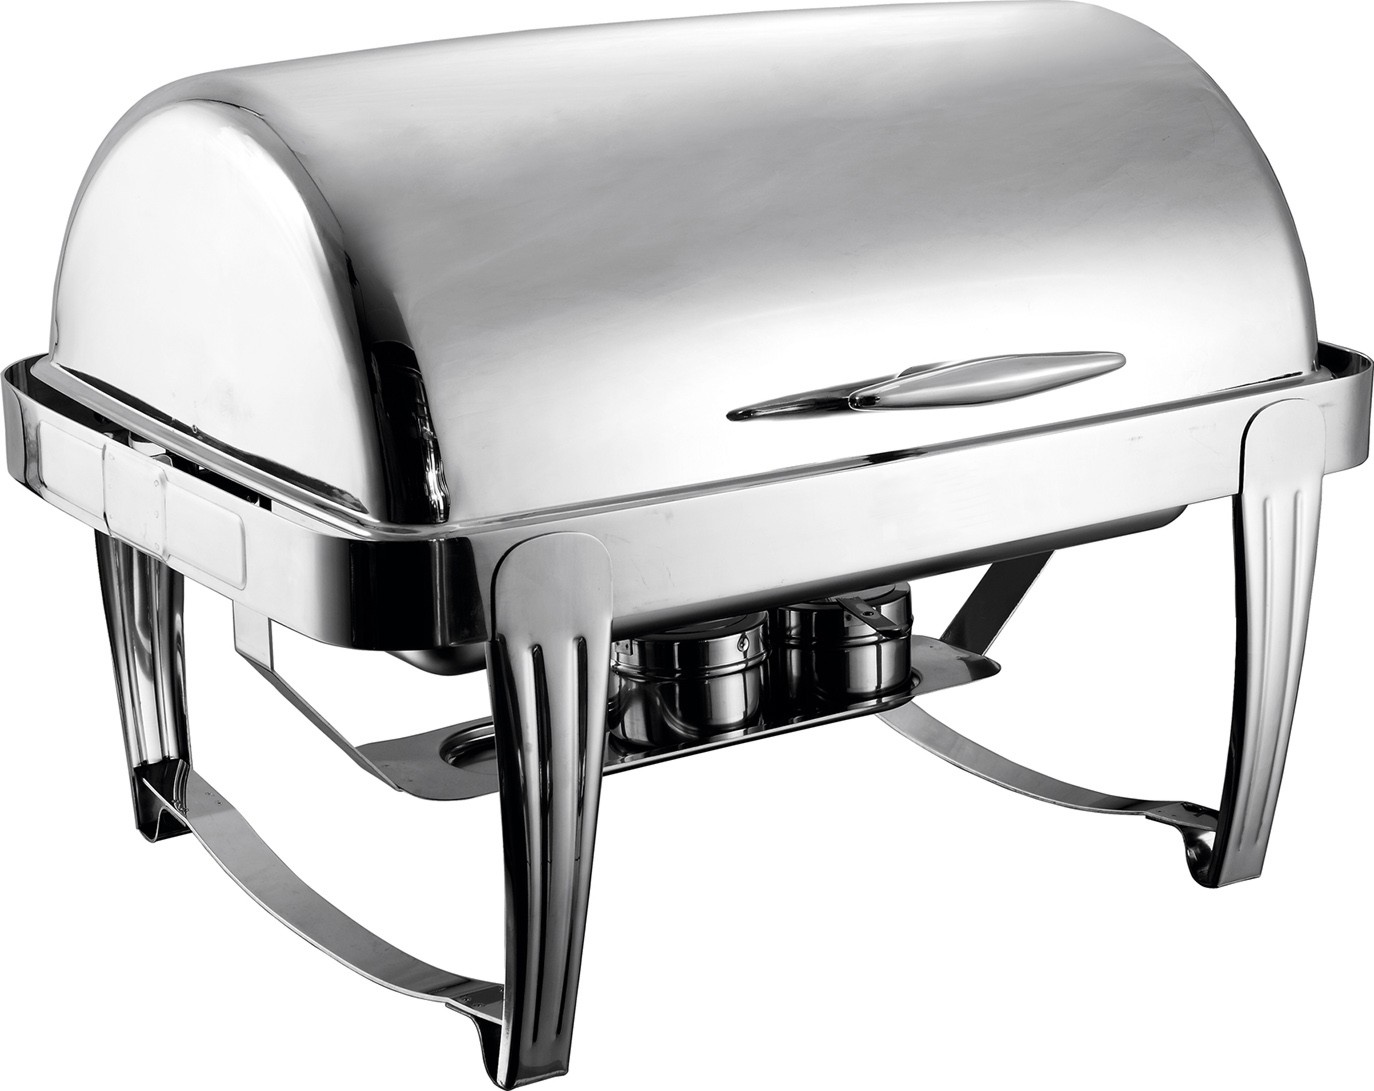 GRT-723B Stainless Steel Rectangular Chafing Dish 9L